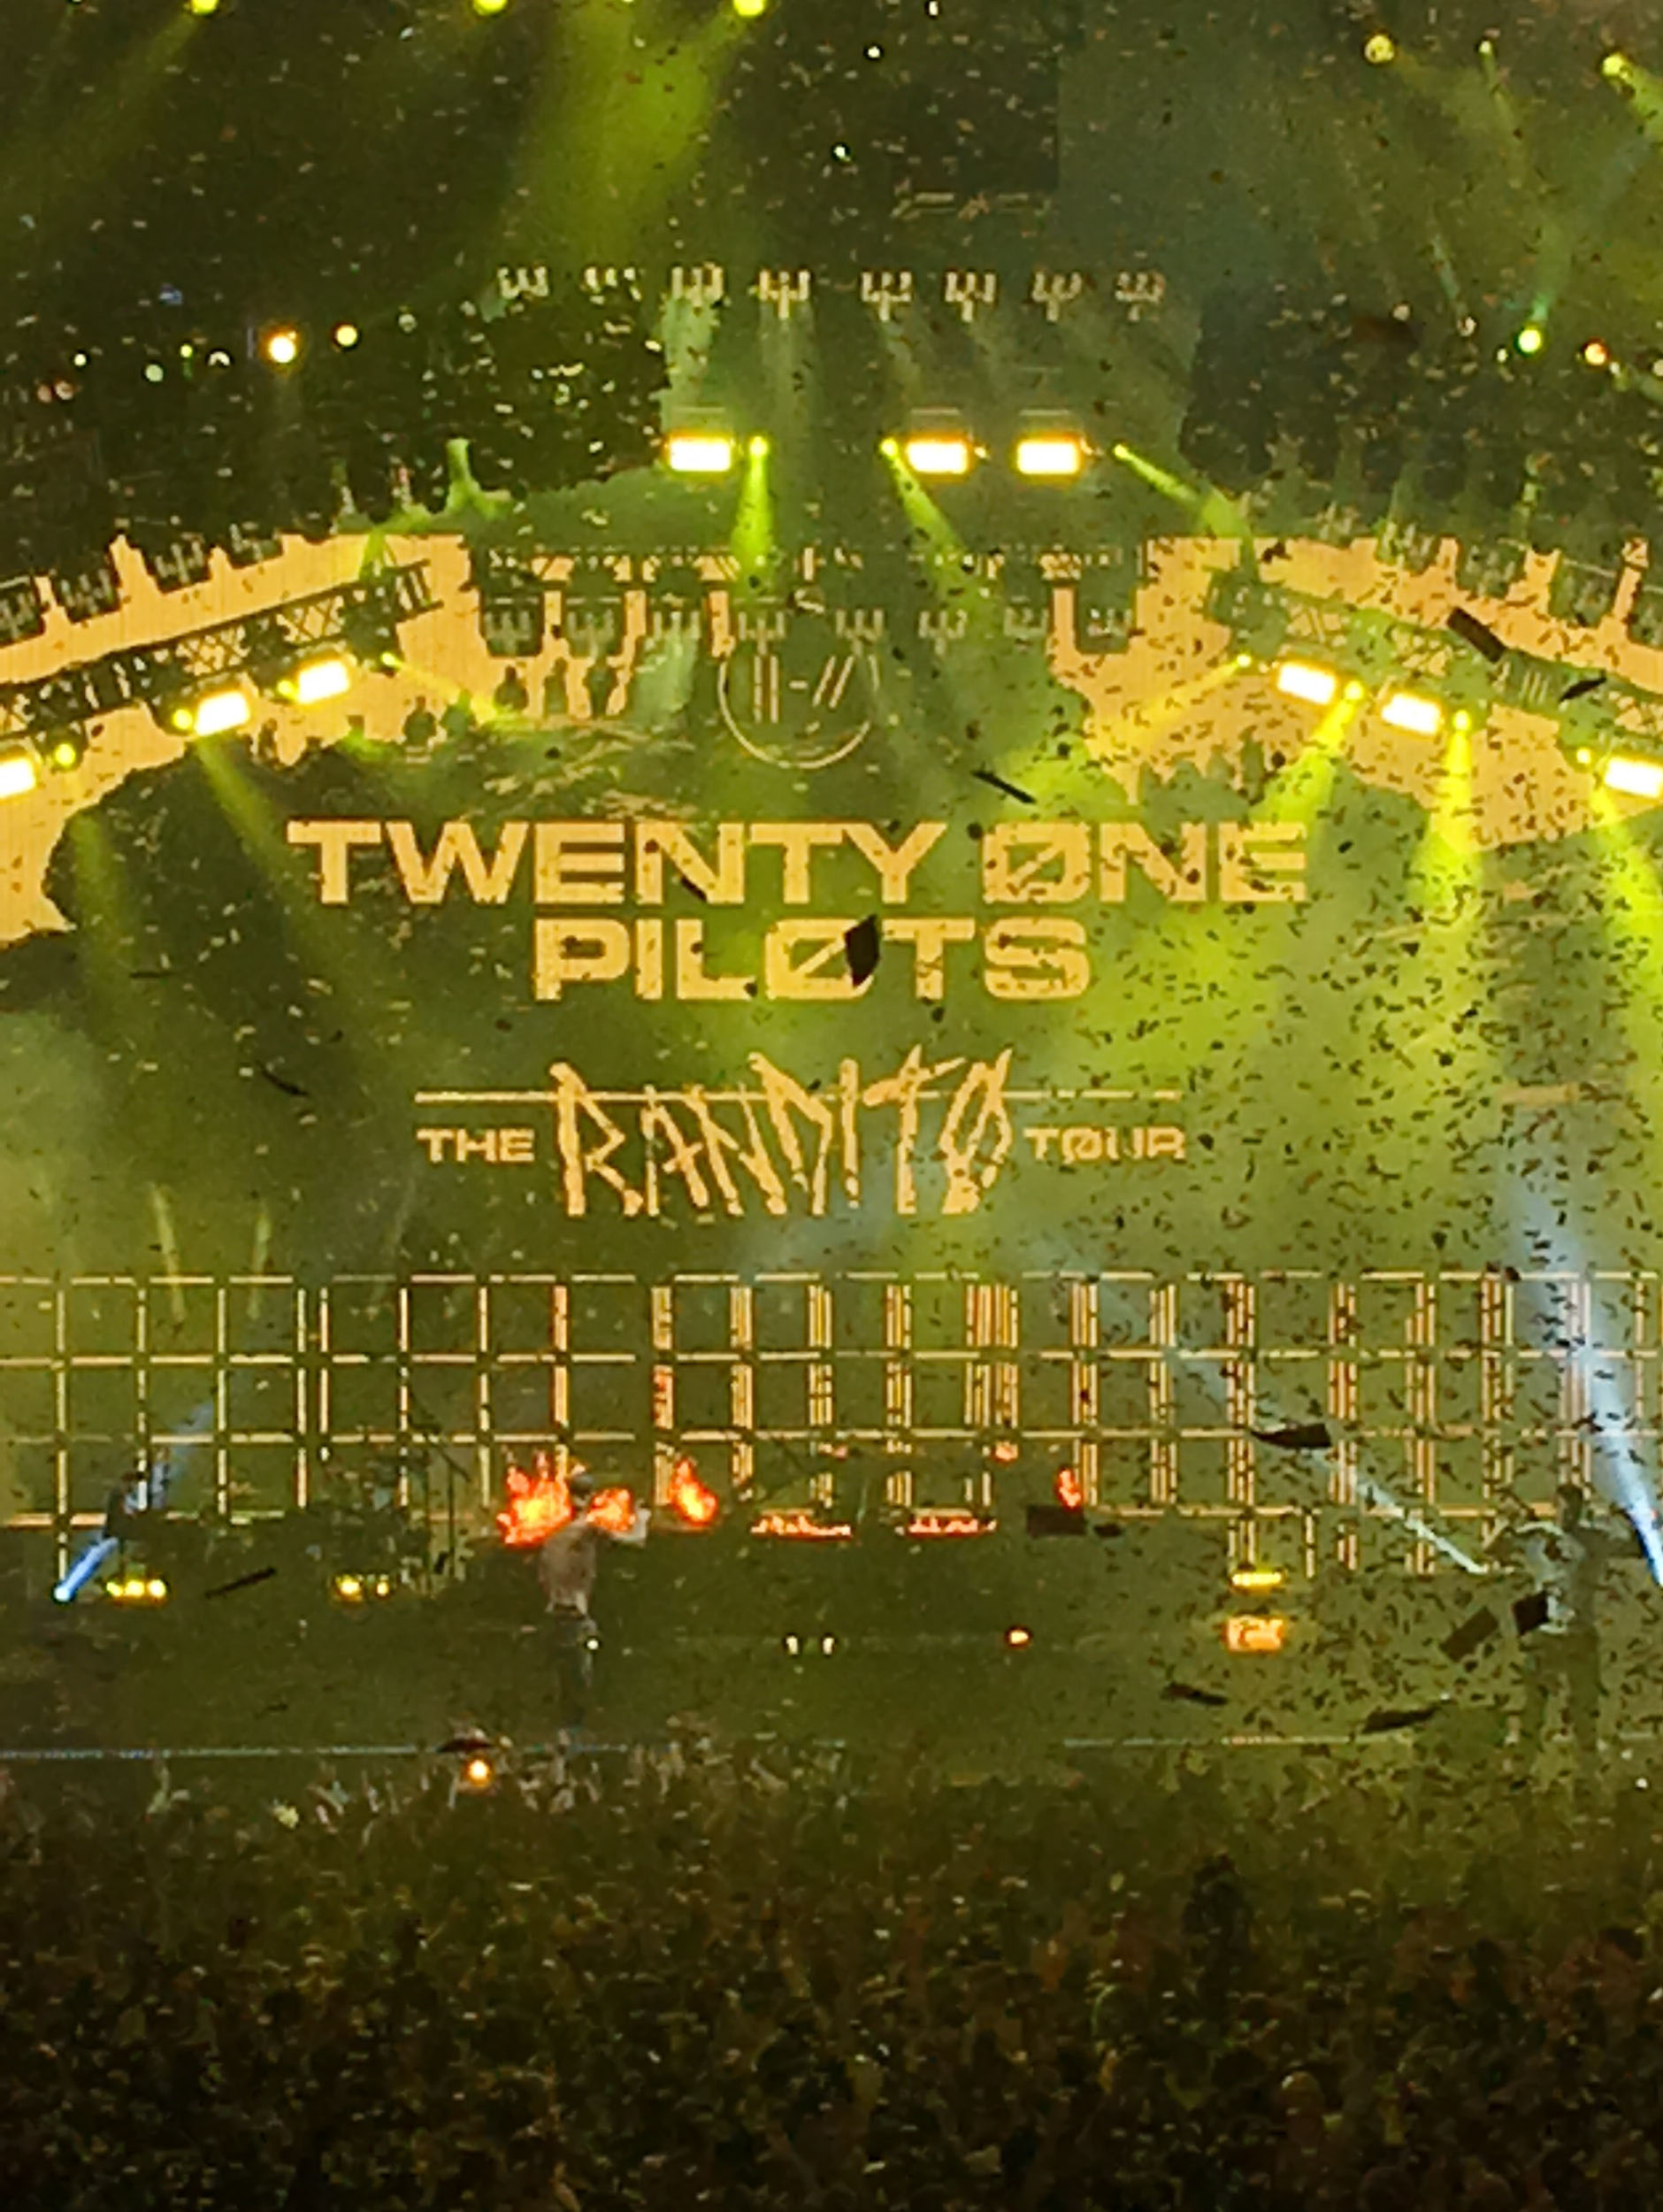 "Twenty One Pilots The Bandito Tour" written across the back wall of the stage and yellow confetti flying around